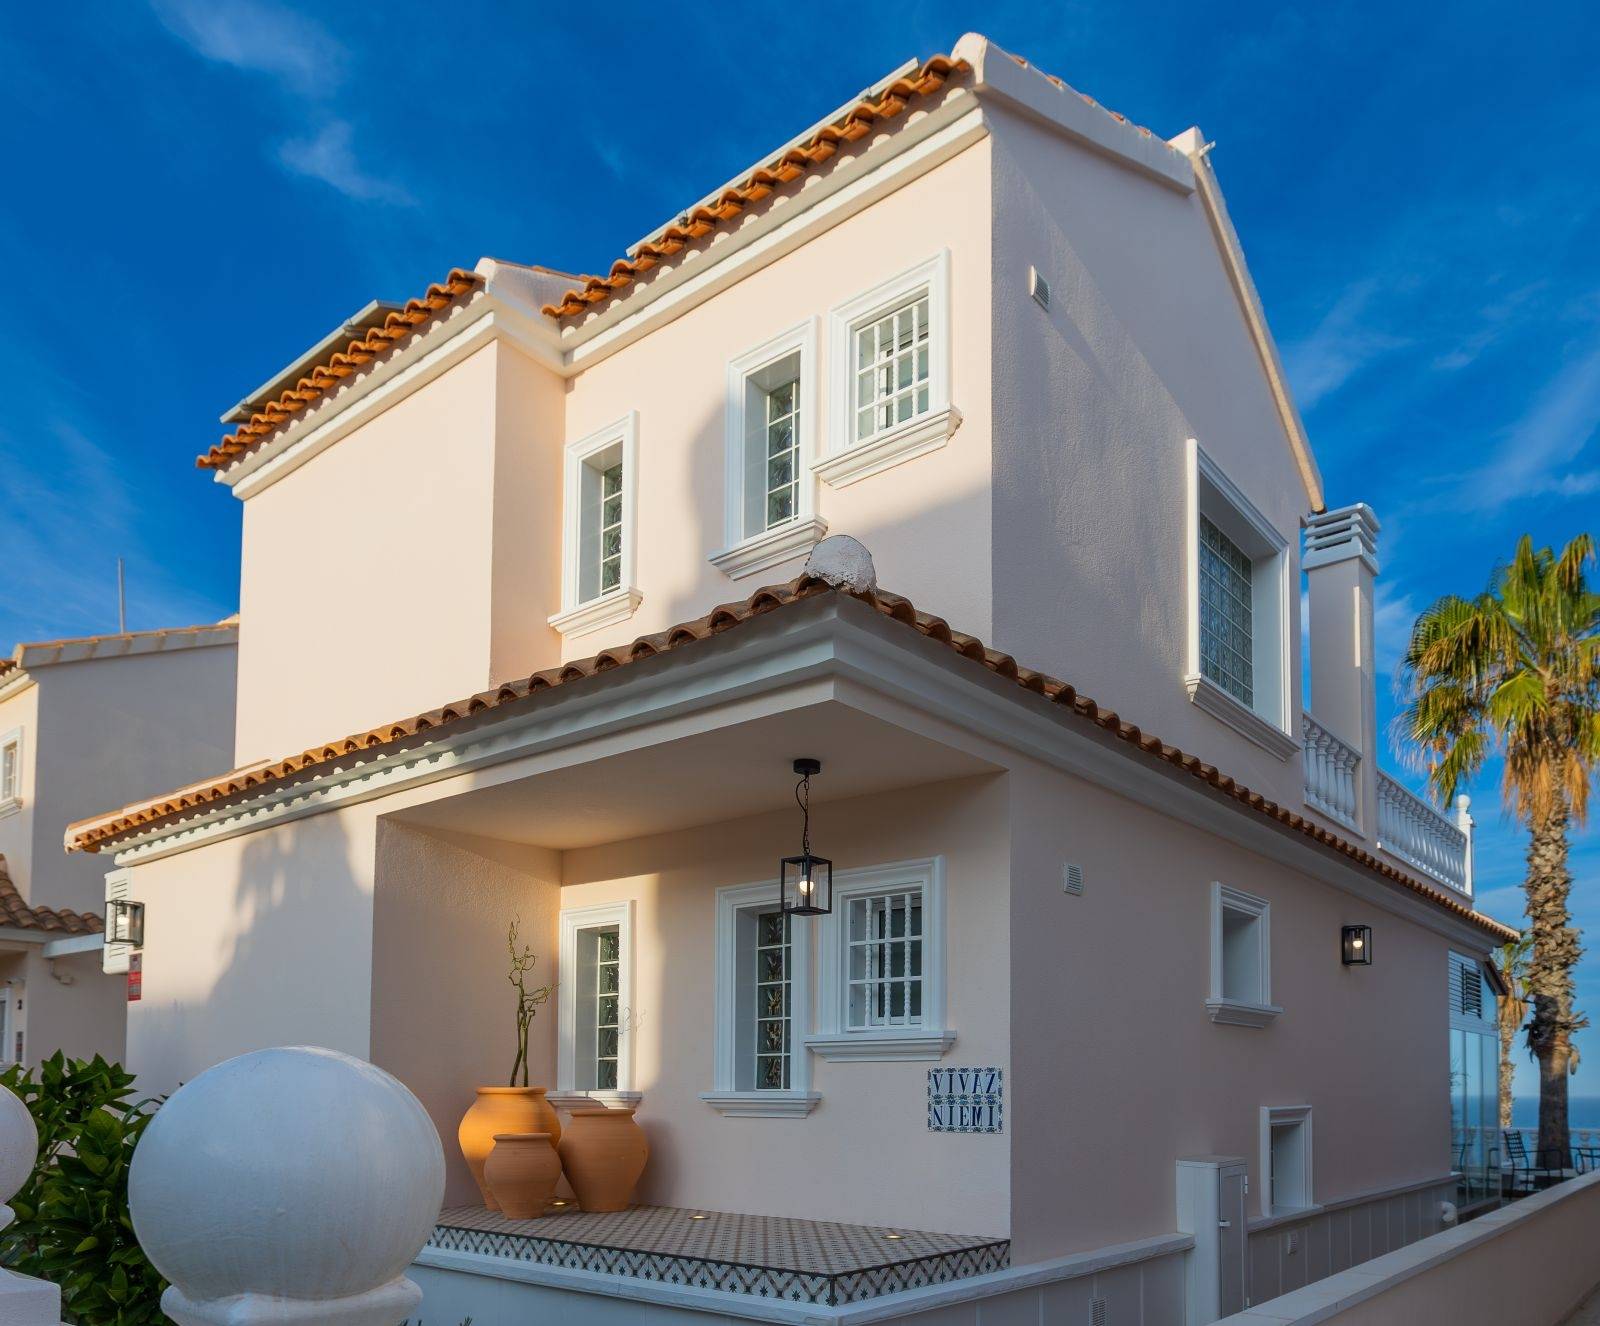 BEAUTIFUL VILLA WITH SPECTACULAR SEA VIEWS IN TORRE DEL MORO 1ST LINE